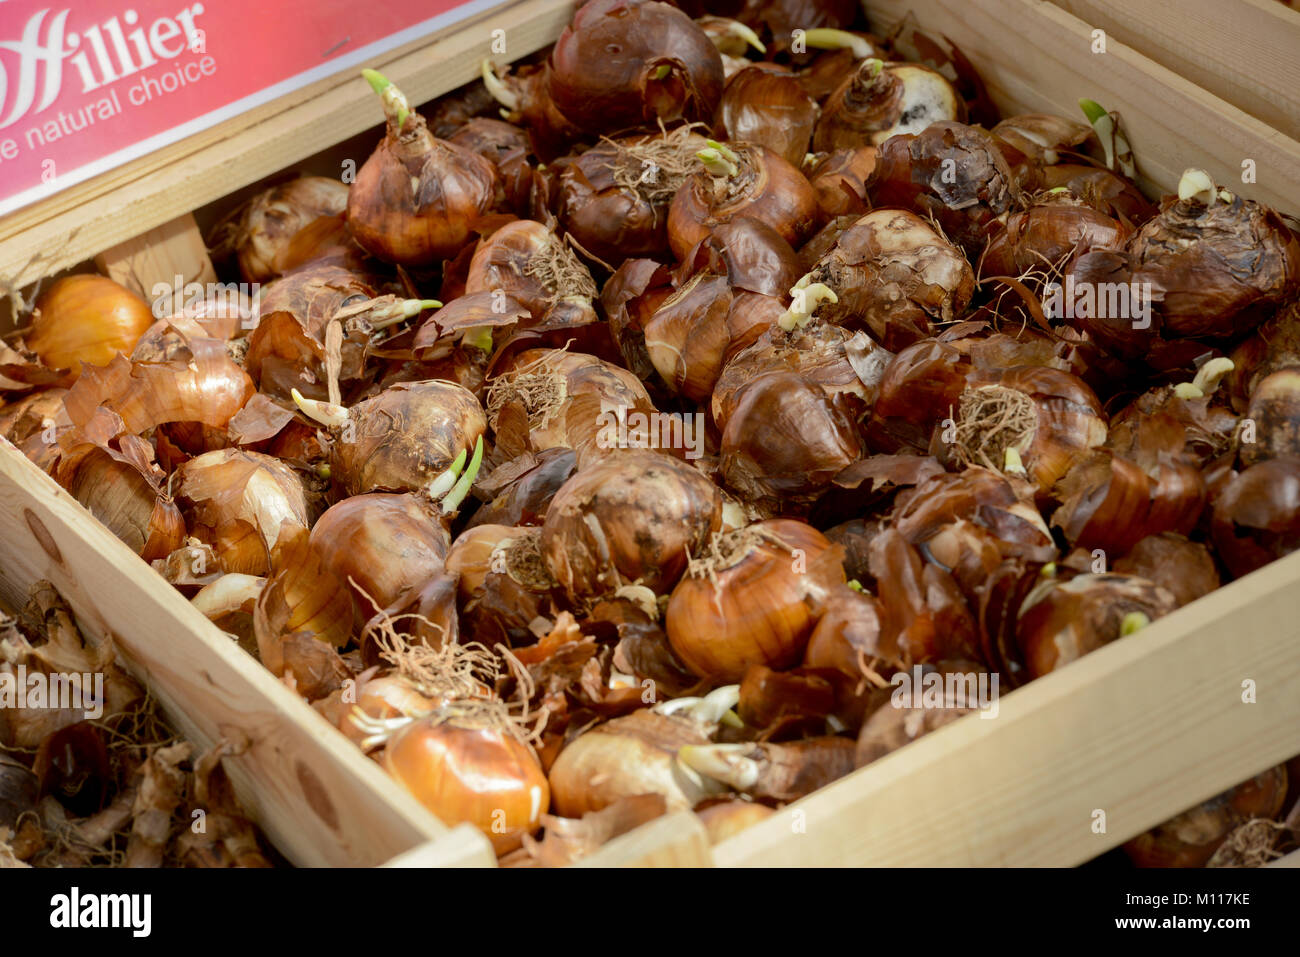 Bulbs for sale at Hilliers garden centre in the UK Stock Photo